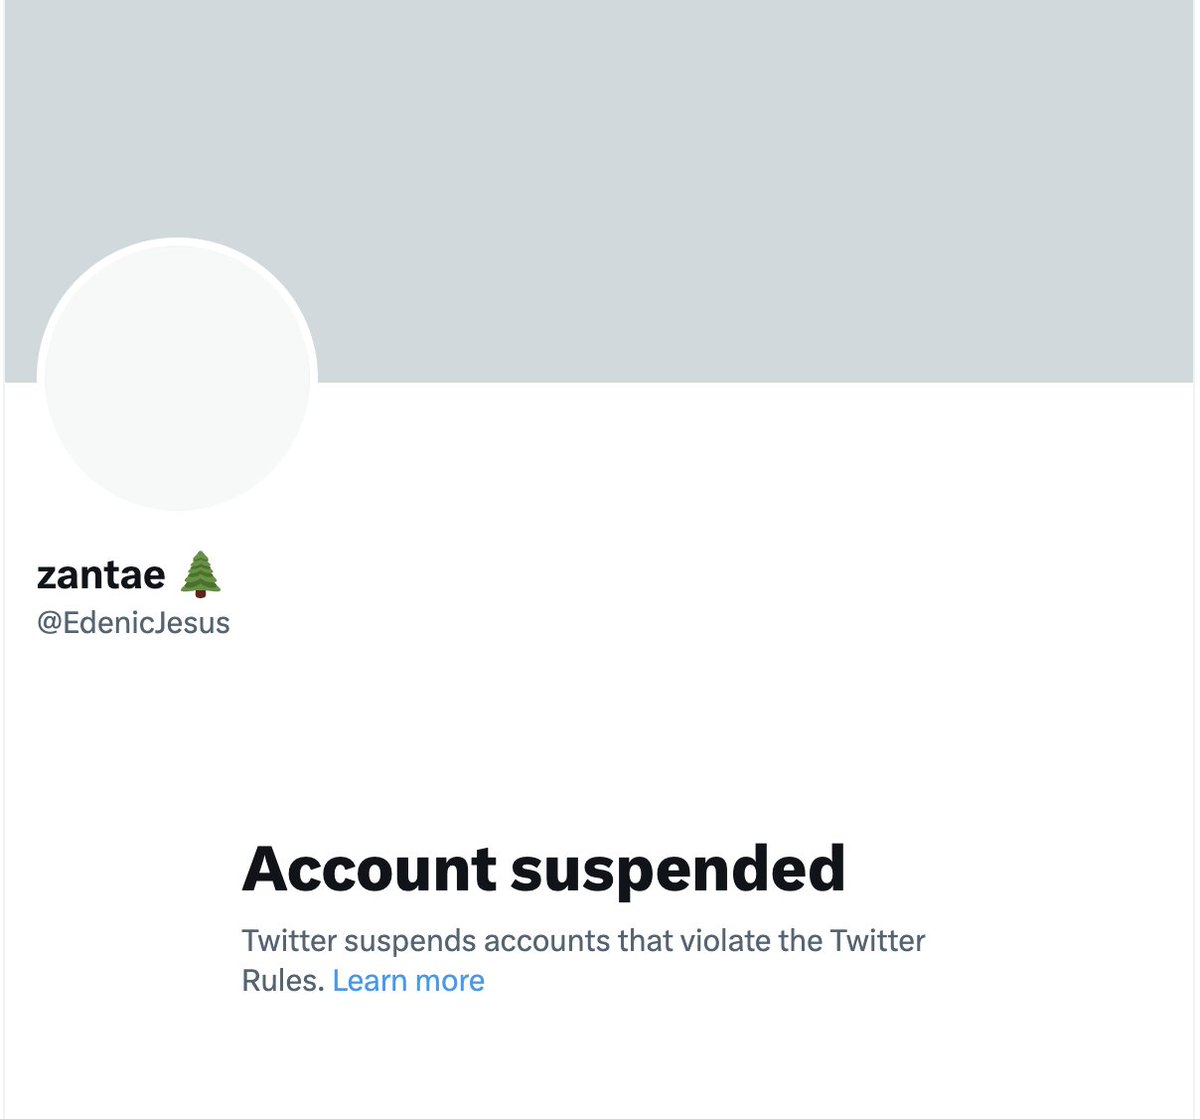 Why is @edenicjesus suspended the day after he released a beautiful new song? His account is nothing but a delight. @elonmusk please stop letting leftists mass report our friends to suspend them! Their work creative, beautiful + nourishes the soul. Twitter was better with Zantae!